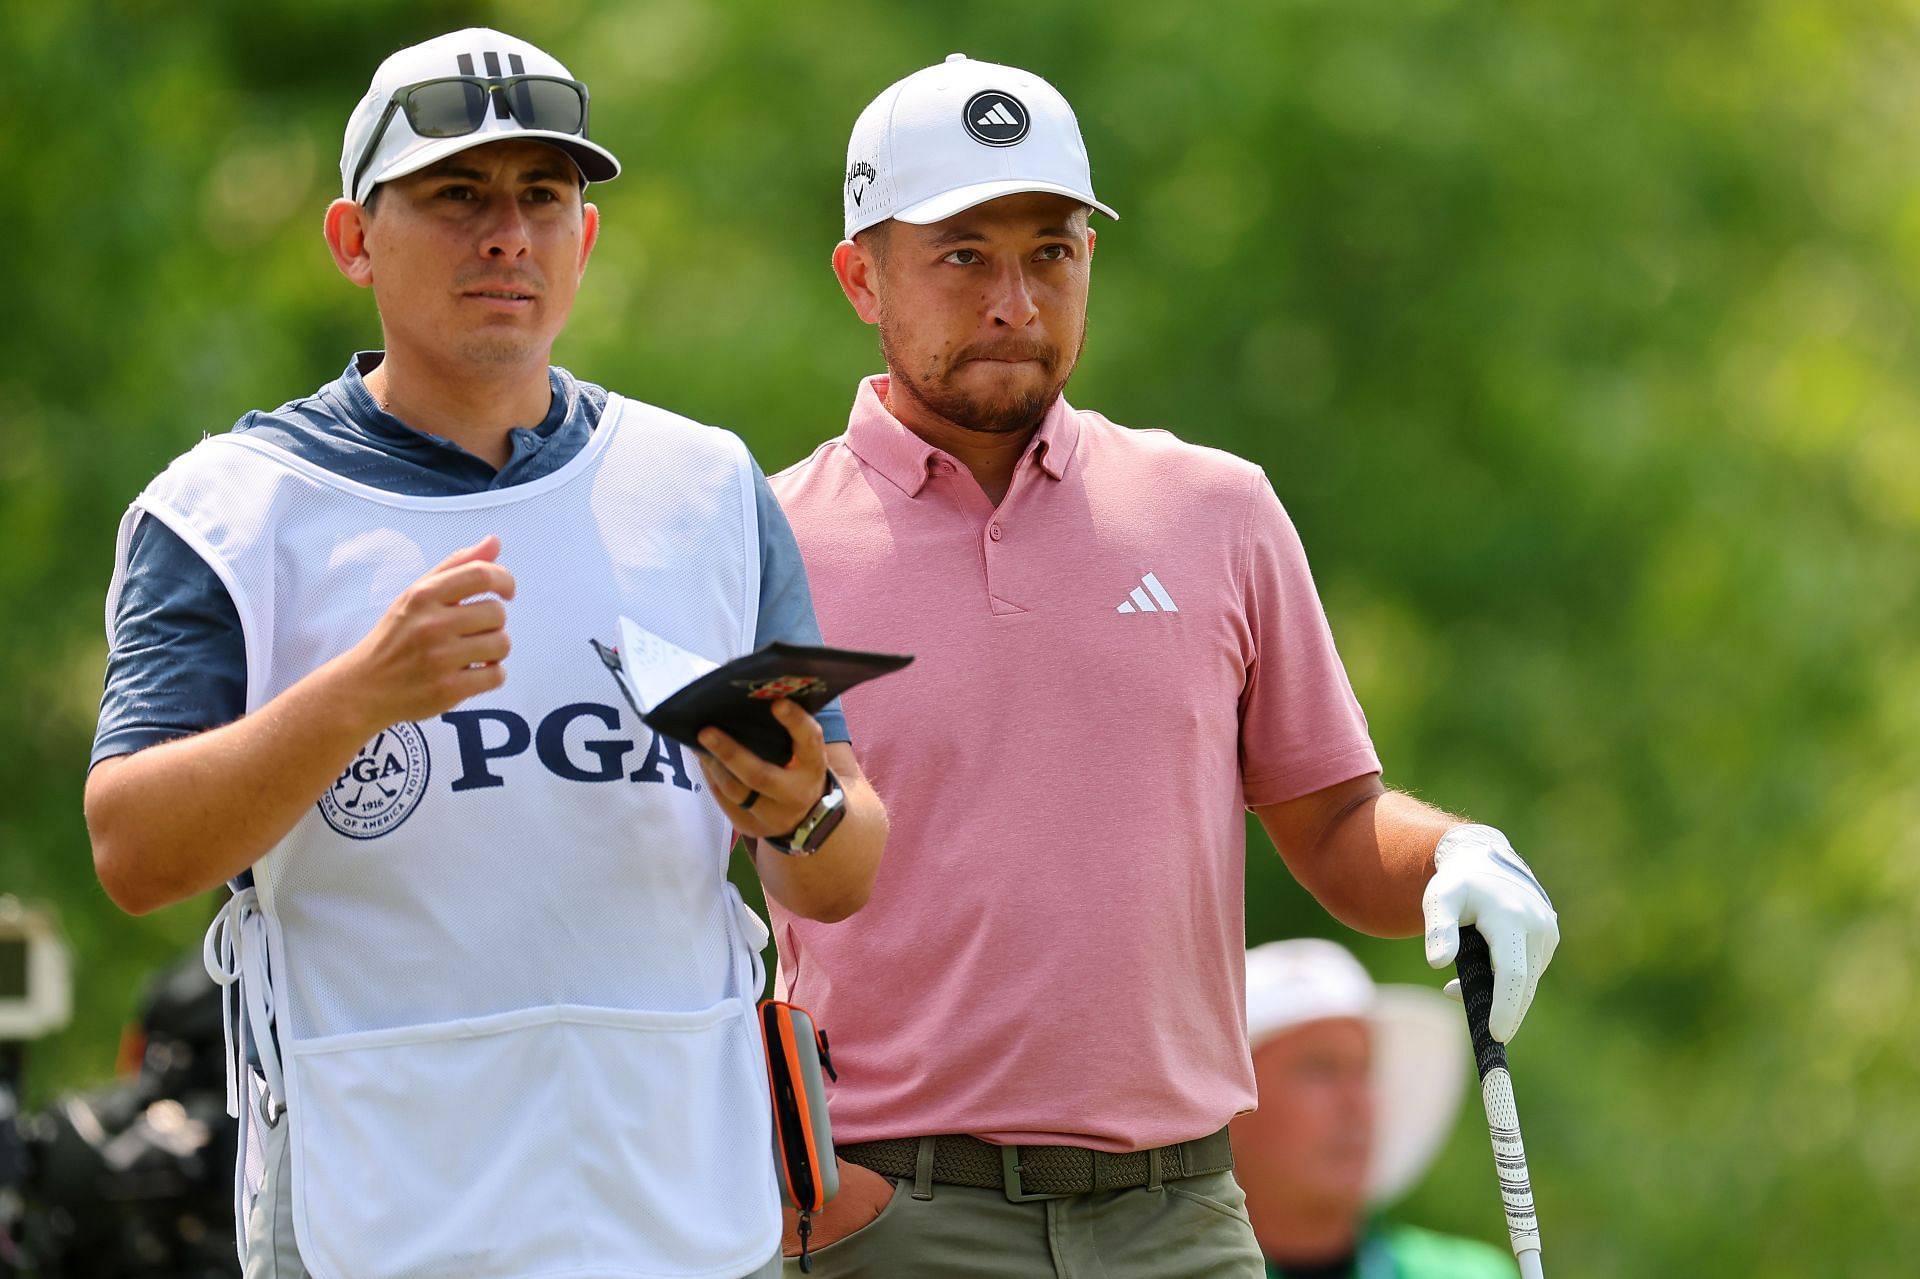 “I thought I was going to get fired” - Xander Schauffele’s caddie ...